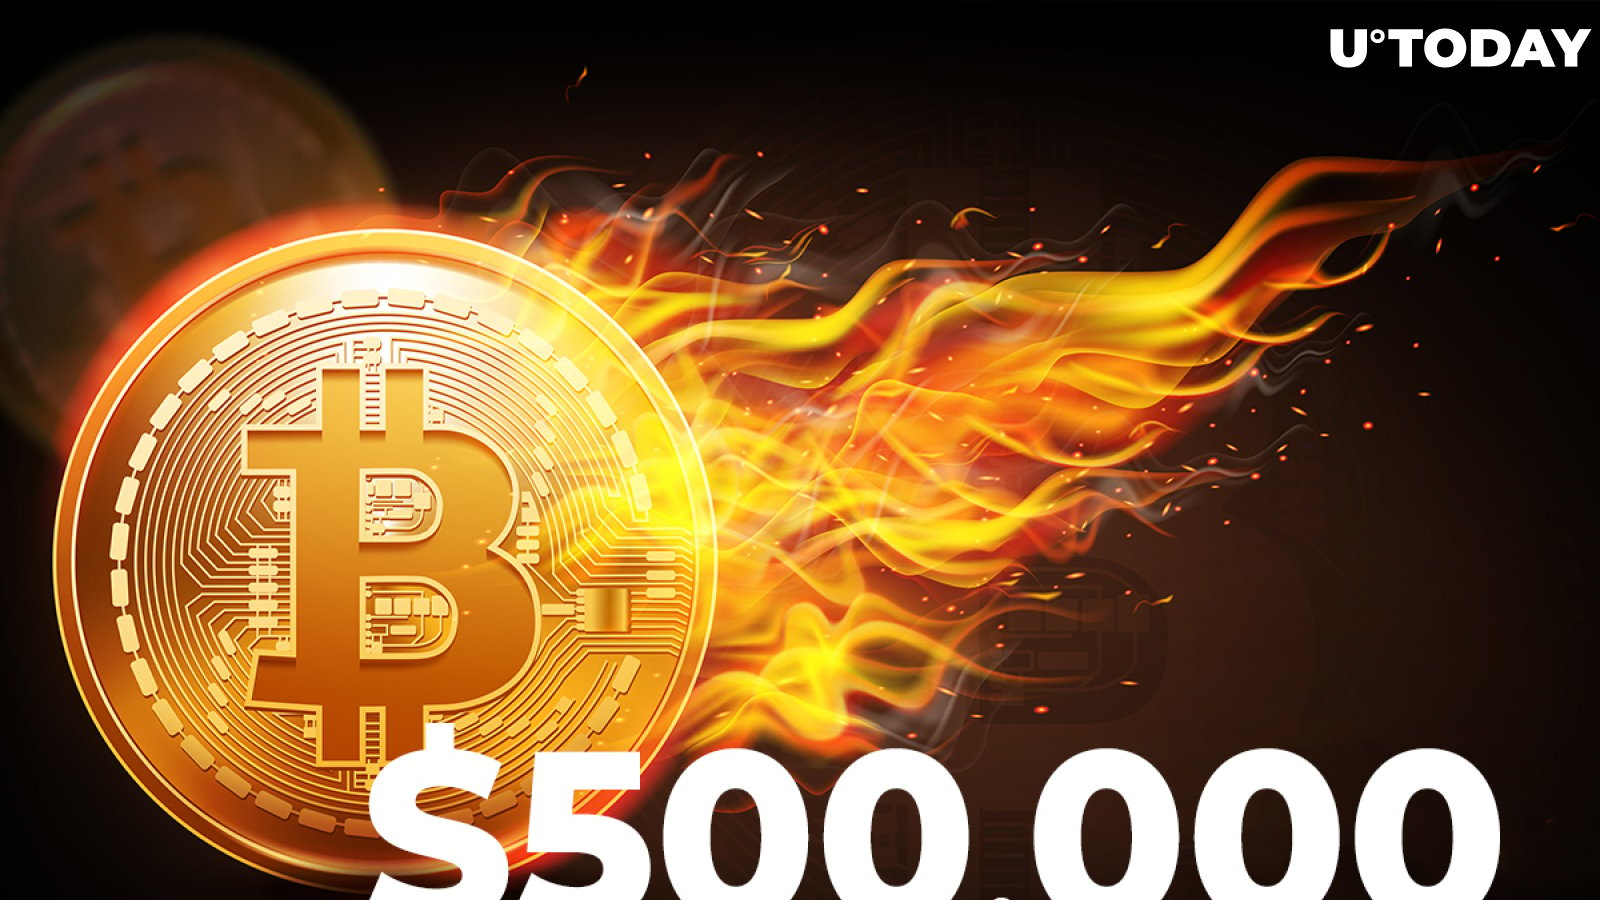 Bitcoin Is Going to $500,000 - NorthmanTrader Founder Supports Cathie Wood